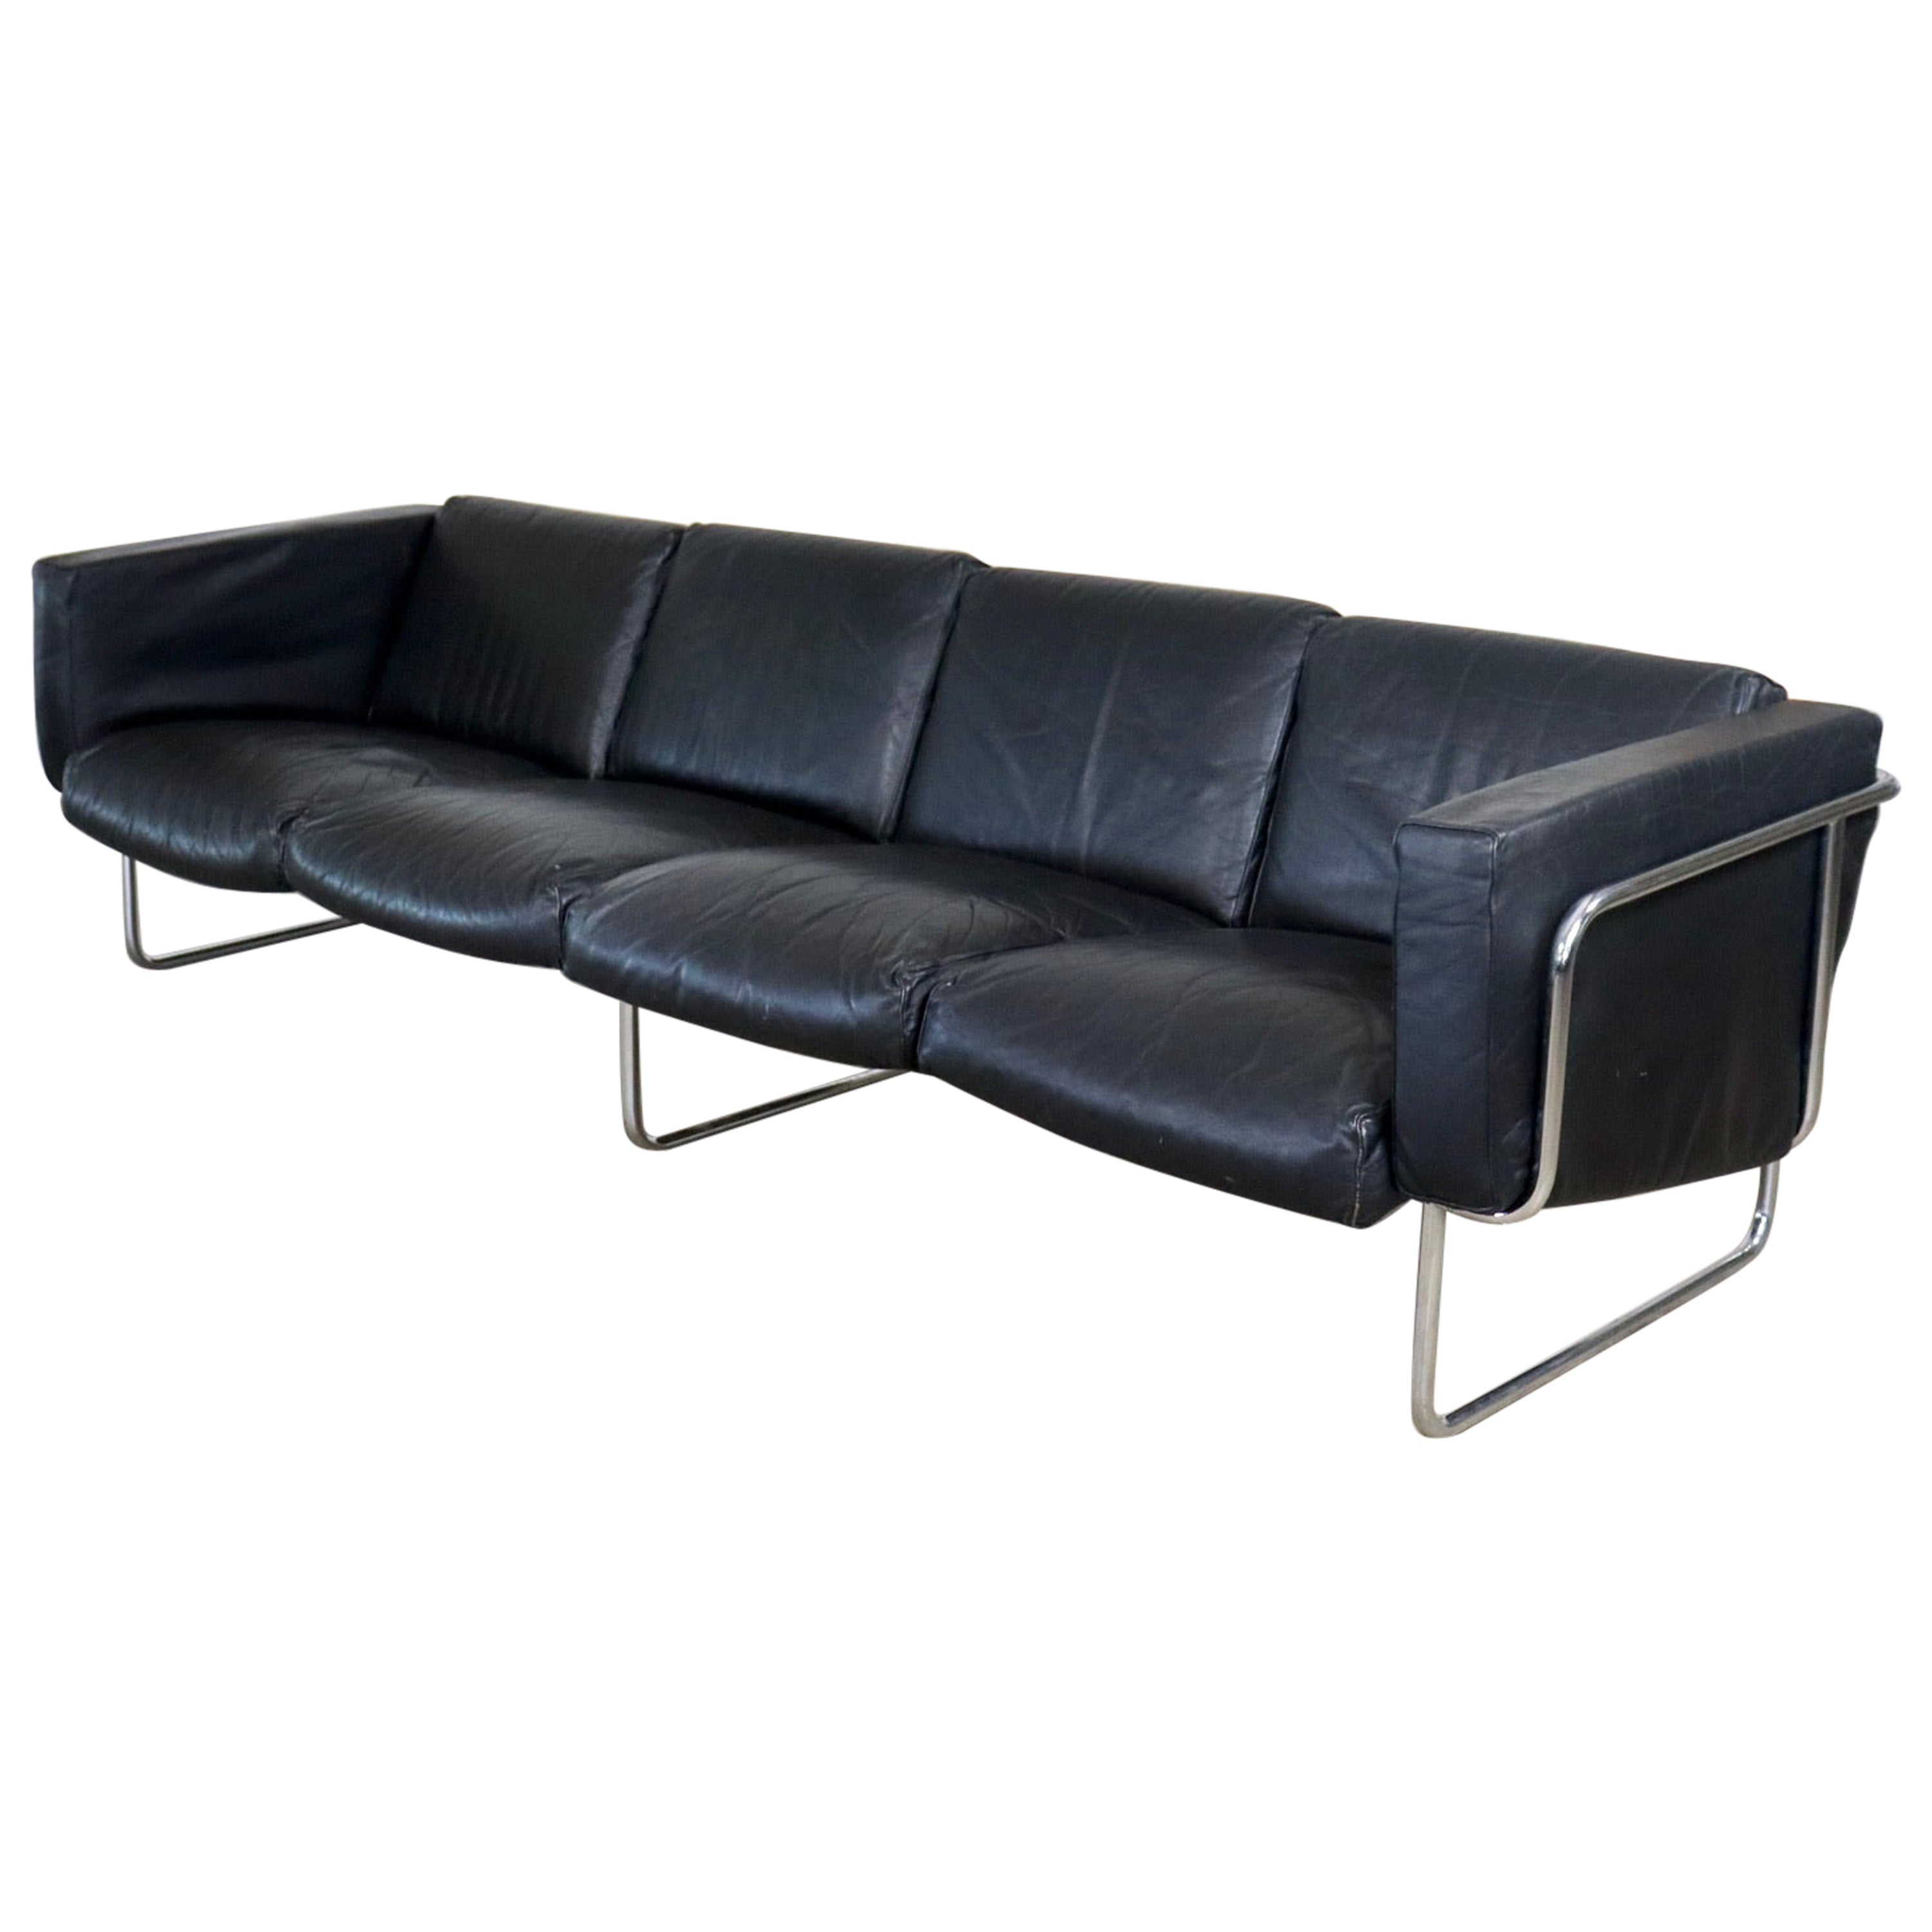 Rare Four Seater Leather Sofa by Hans Eichenberger for Strässle, Switzerland 70s